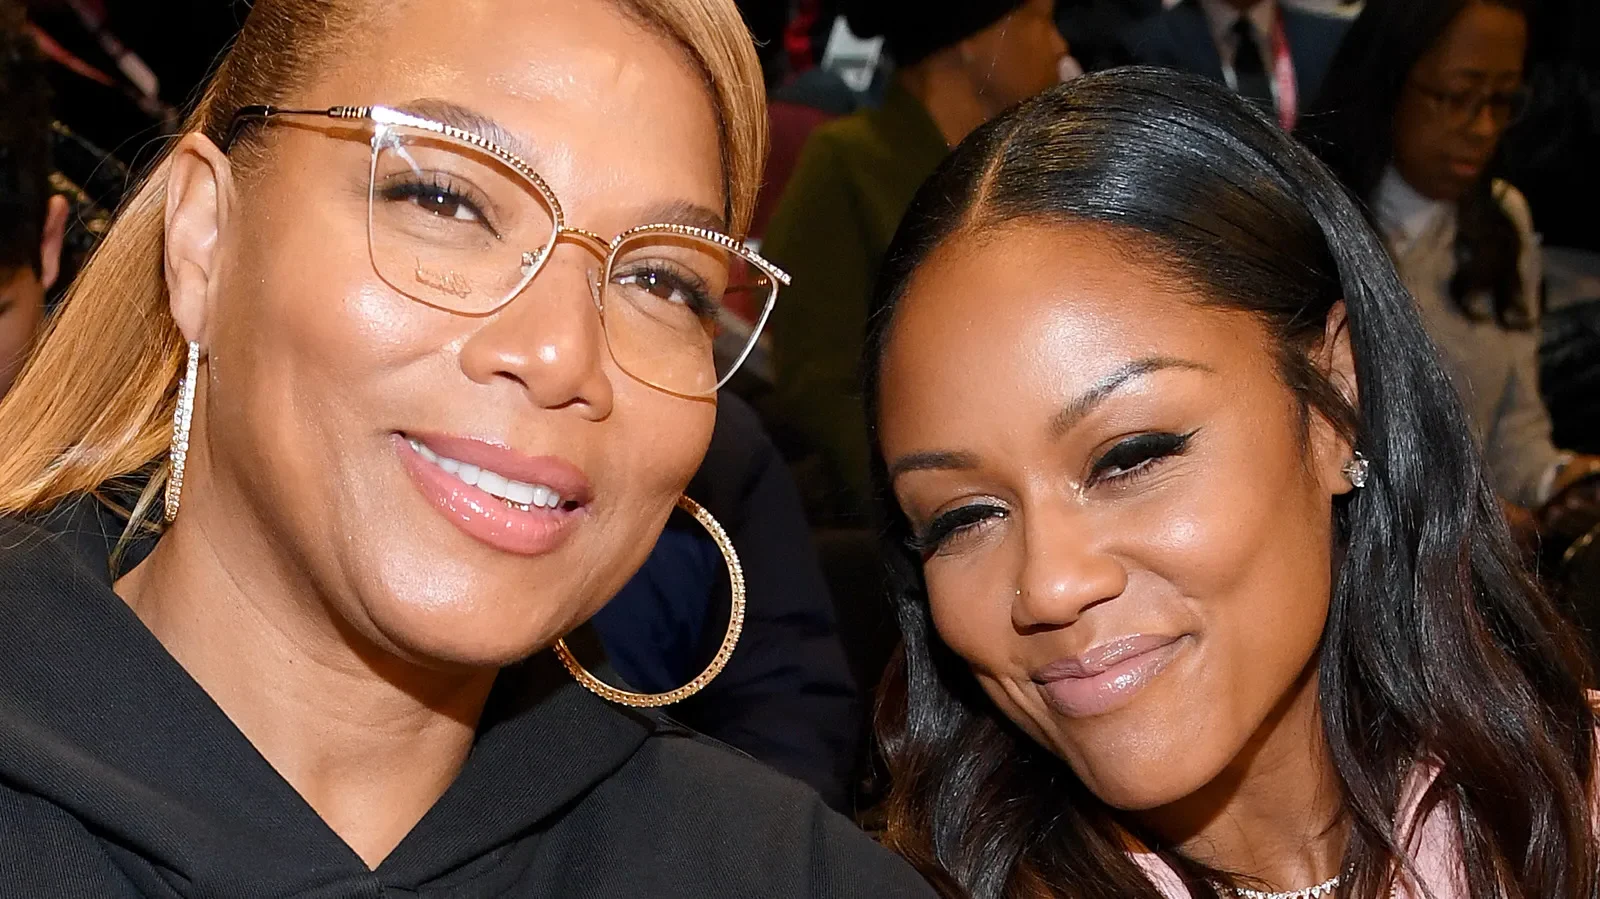 Queen Latifah's Partner Eboni Nichols: Everything You Should Know About Her Private Relationship